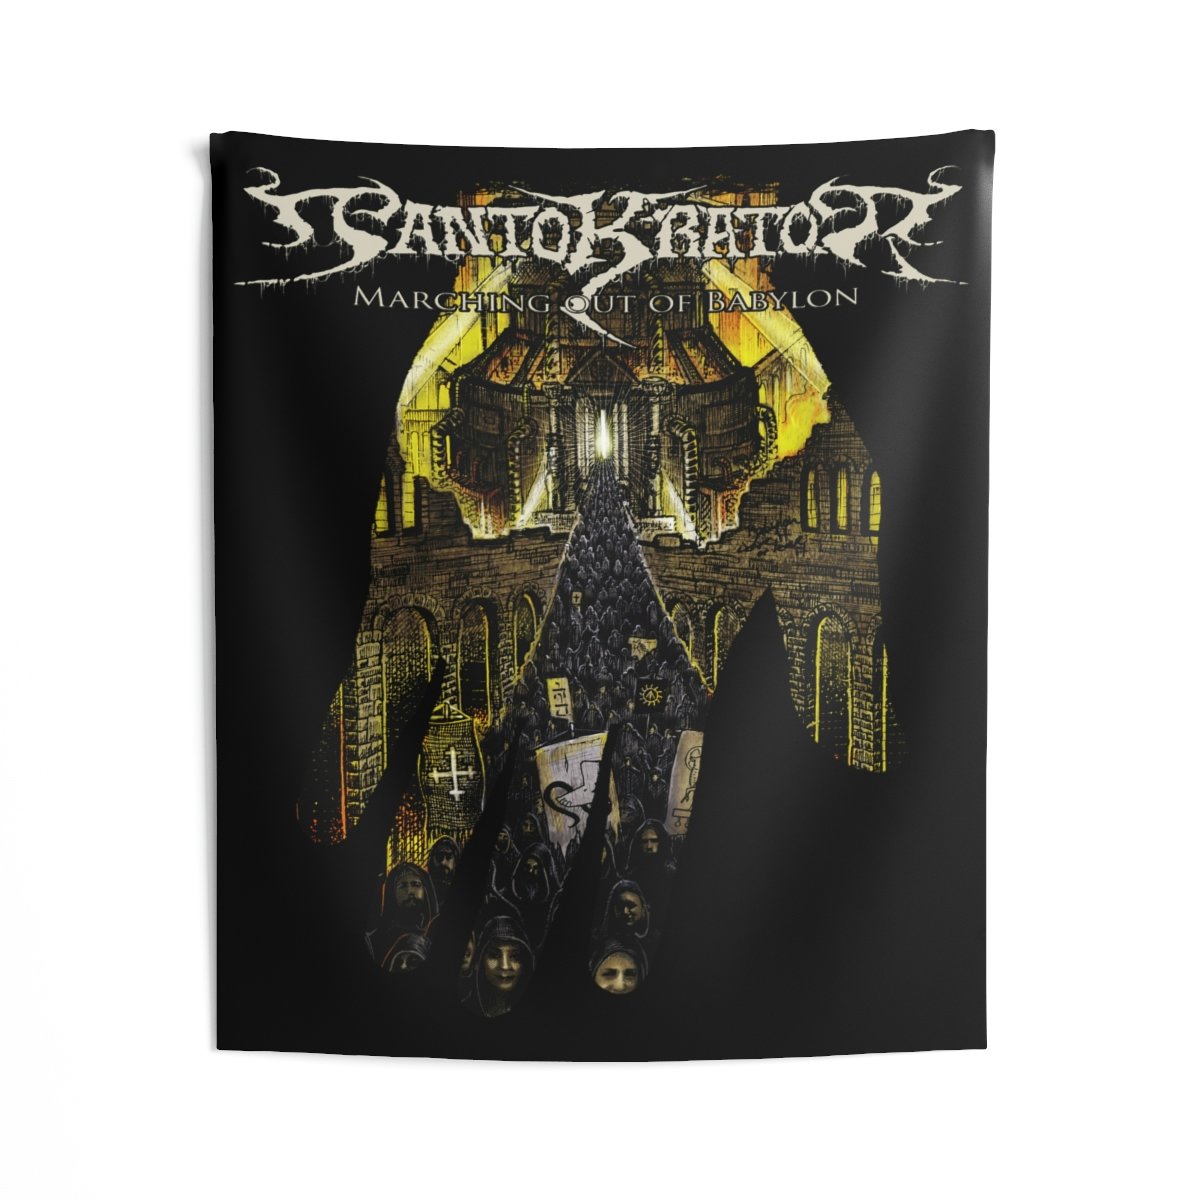 Pantokrator – Marching Out of Babylon Hand of God Indoor Wall Tapestries